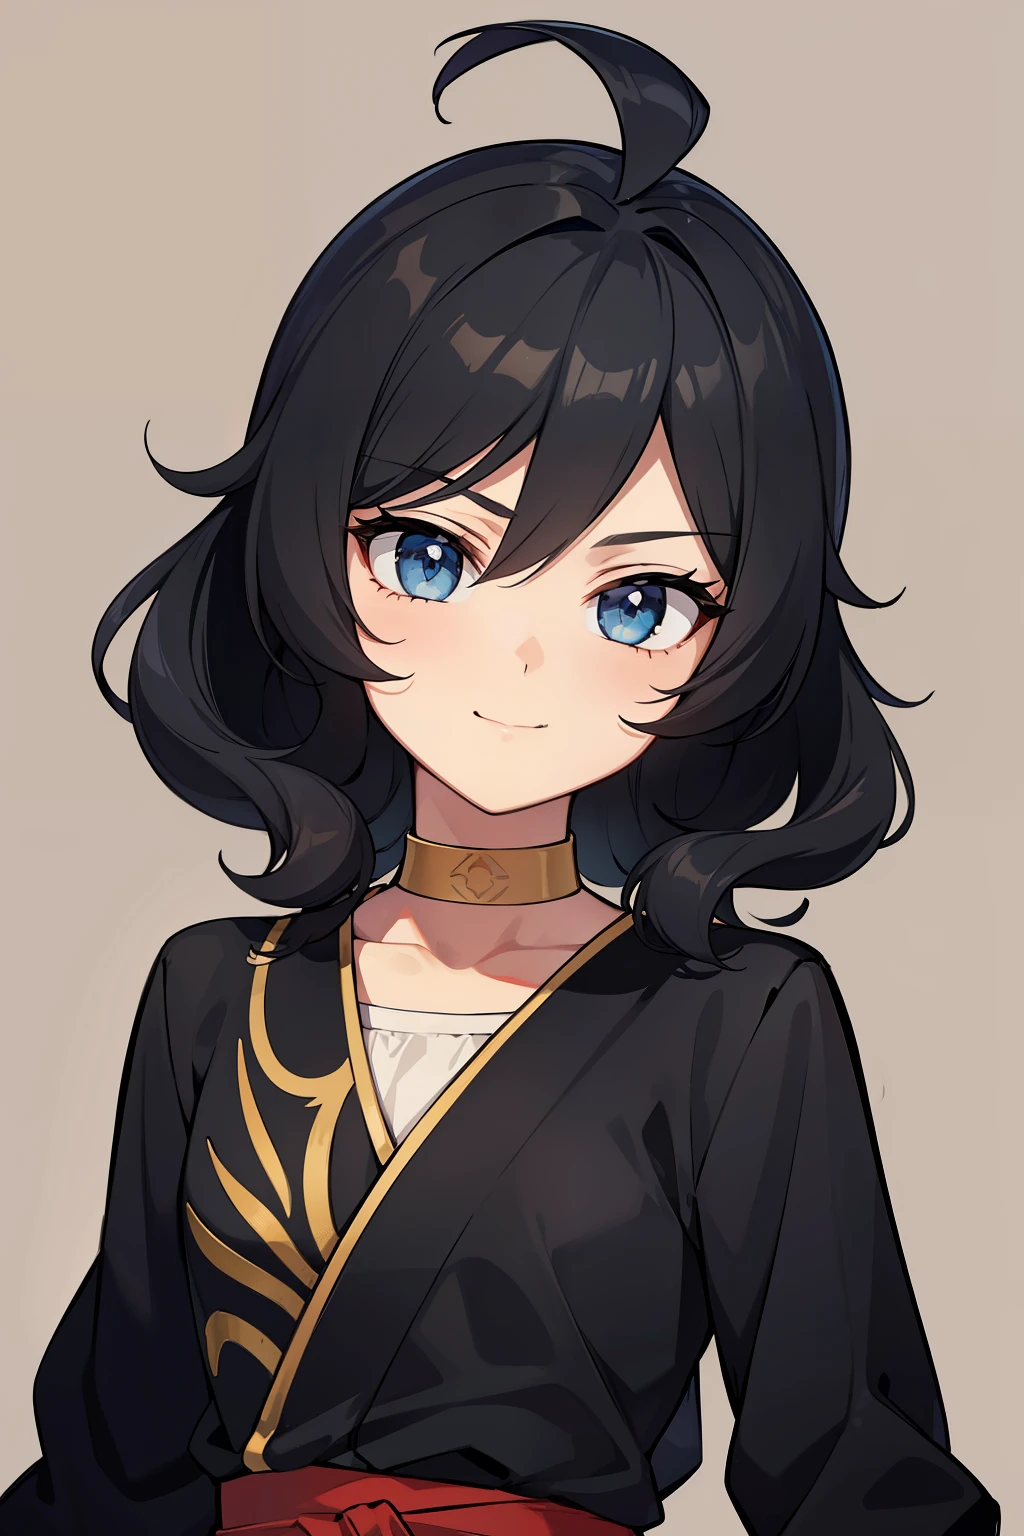 (high-quality, breathtaking),(expressive eyes, perfect face) portrait, 1girl, girl, solo, young kid, , black hair, blue coloured eyes, stylised hair, gentle smile, medium length hair, loose hair, side bangs, curley hair, really spiky hair, spiked up hair, stylized hair, looking at viewer, portrait, ancient greek clothes, black long sleeved tunic gold trim around collar edges and down middle, greek, red and gold sash, simple background, laurel accessory, slightly narrow eyes, baby face, , happy expression, clothes similar to Hypnos Saint Seiya